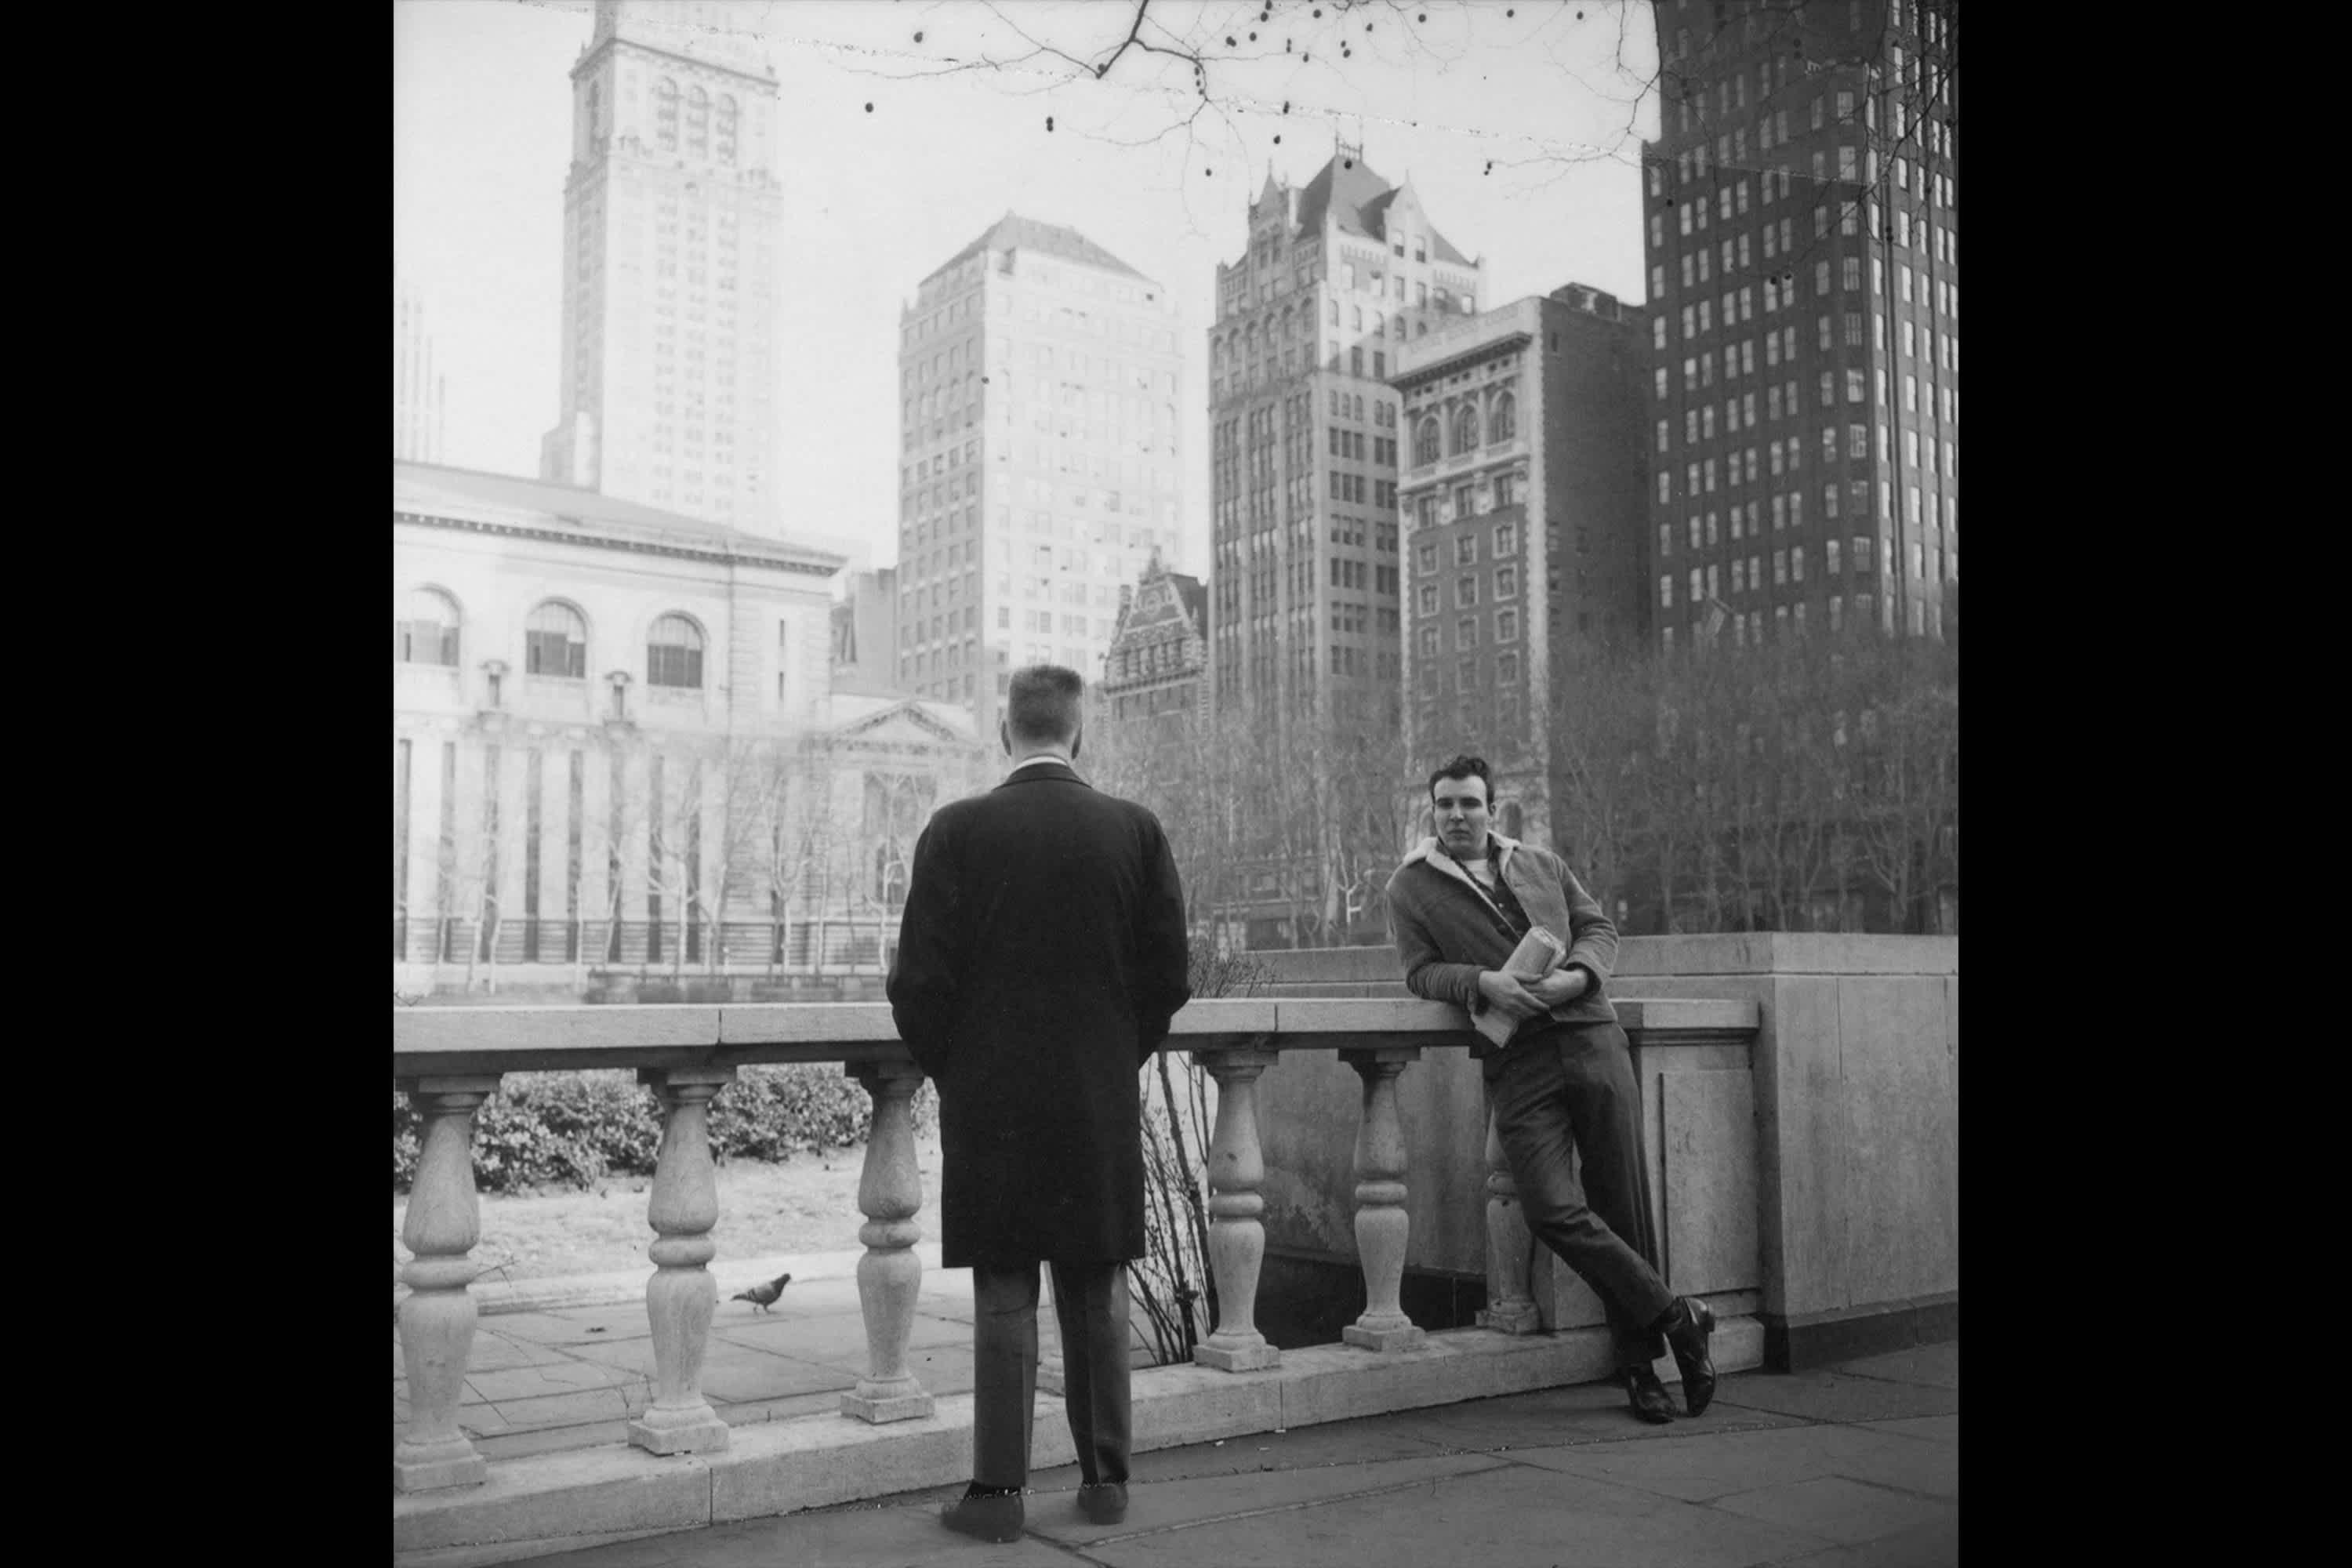 Two men in Bryant Park, 1960s